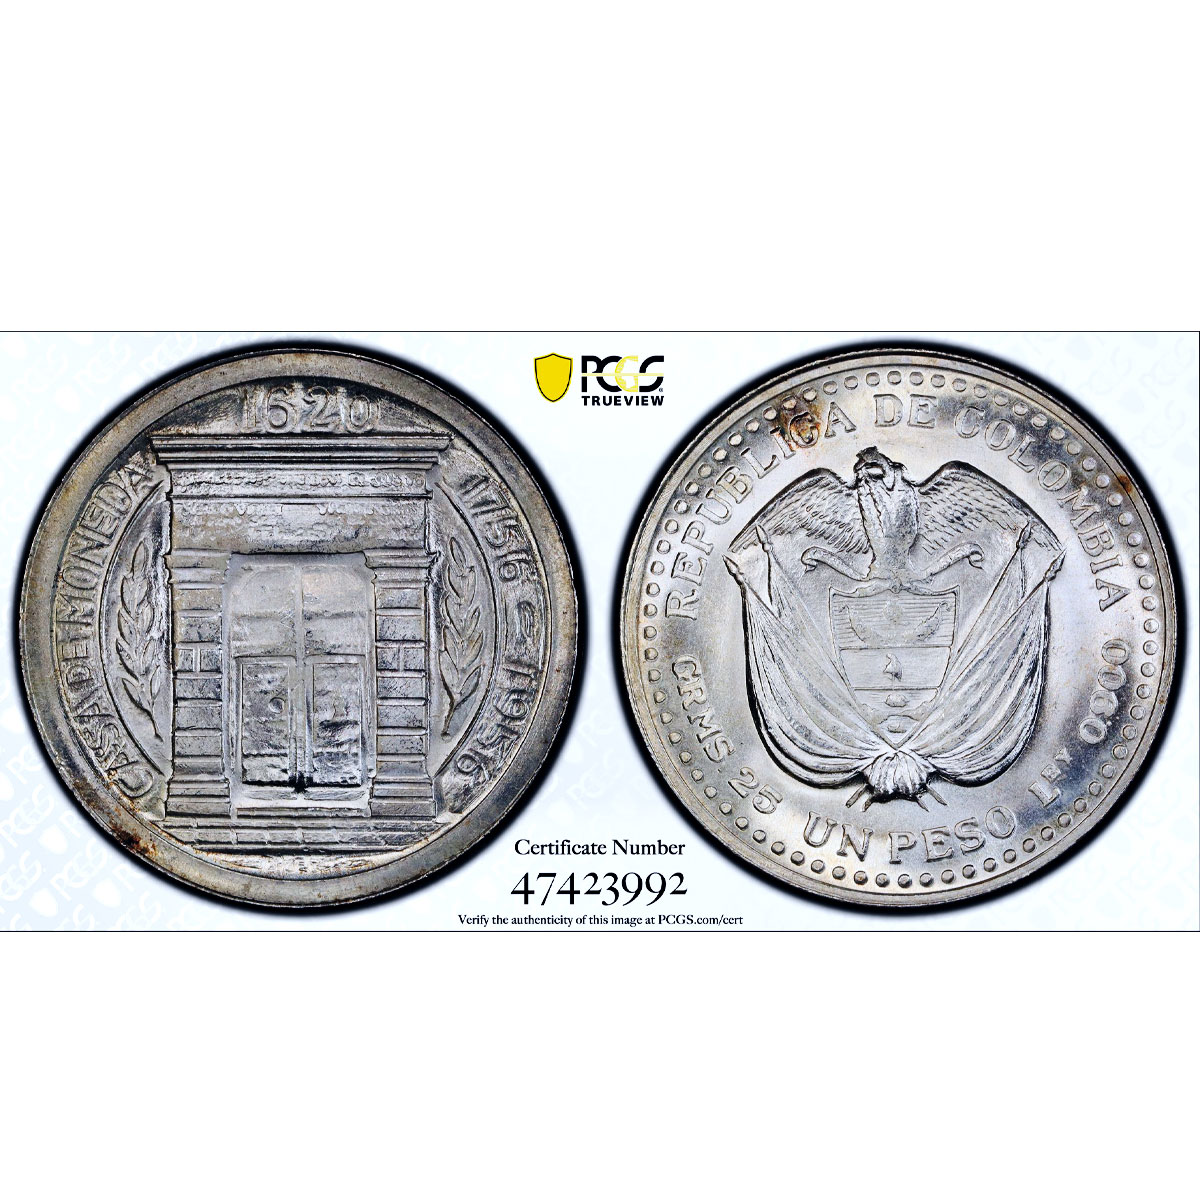 Colombia 1 peso Bogota Popayan Mint Monument of Gates MS66 PCGS silver coin 1956